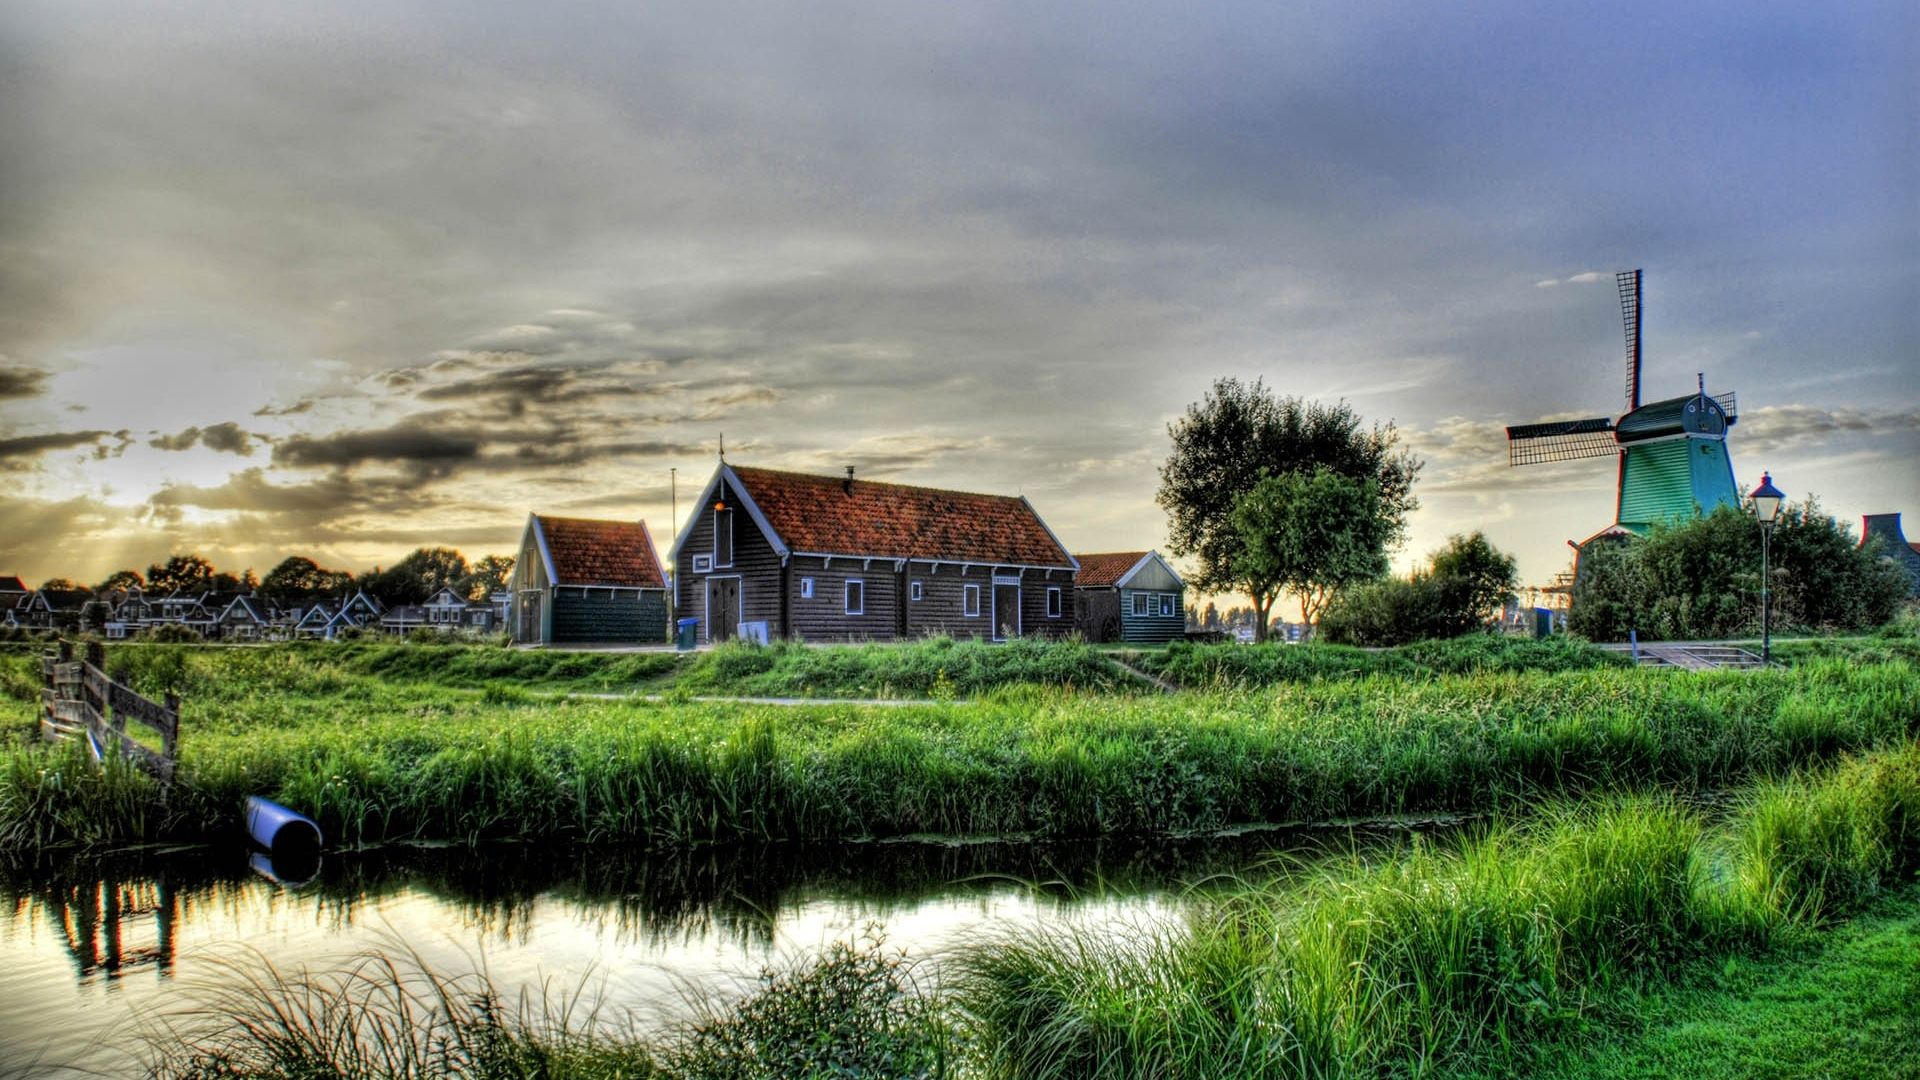 Download Wallpaper 1920x1080 village, mill, house, grass, lake, hdr Full HD 1080p HD Background